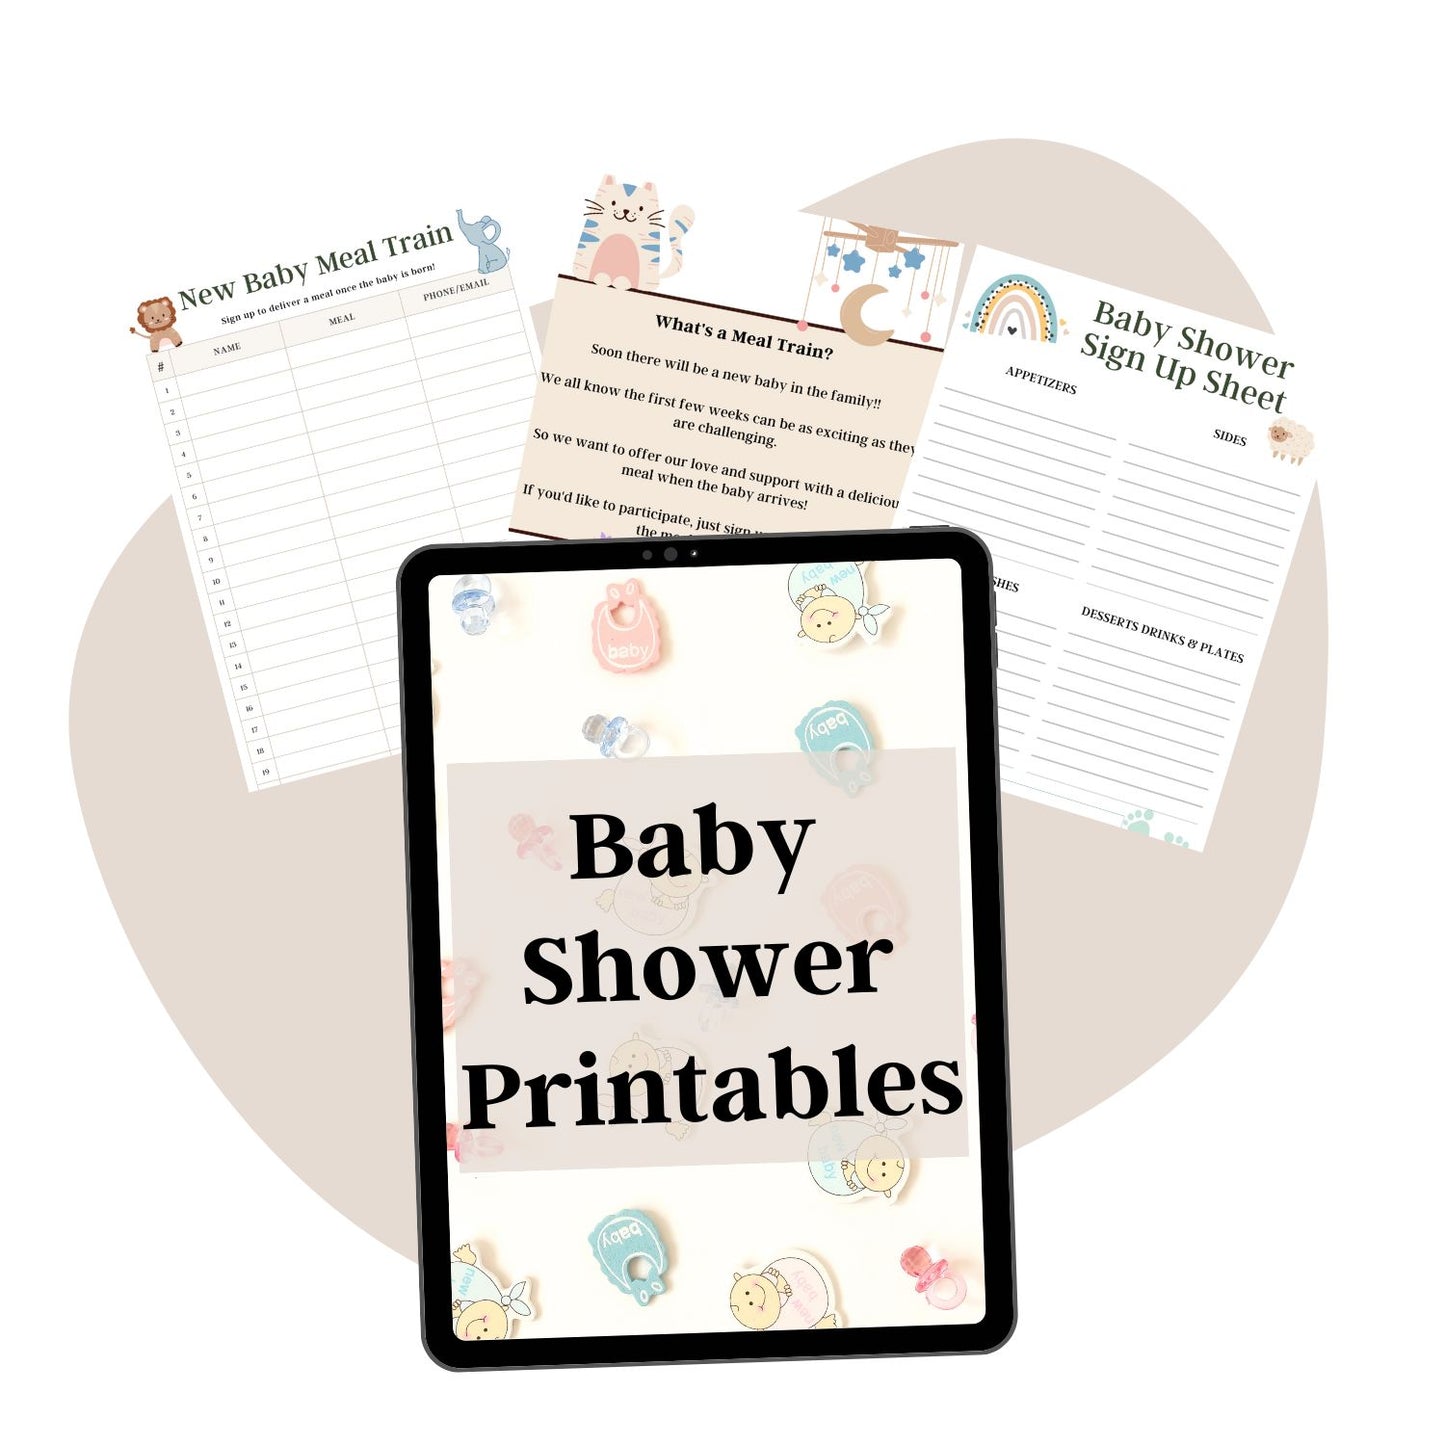 collage of the 3 baby shower printables - includes a baby shower sign up sheet and new baby meal train printable